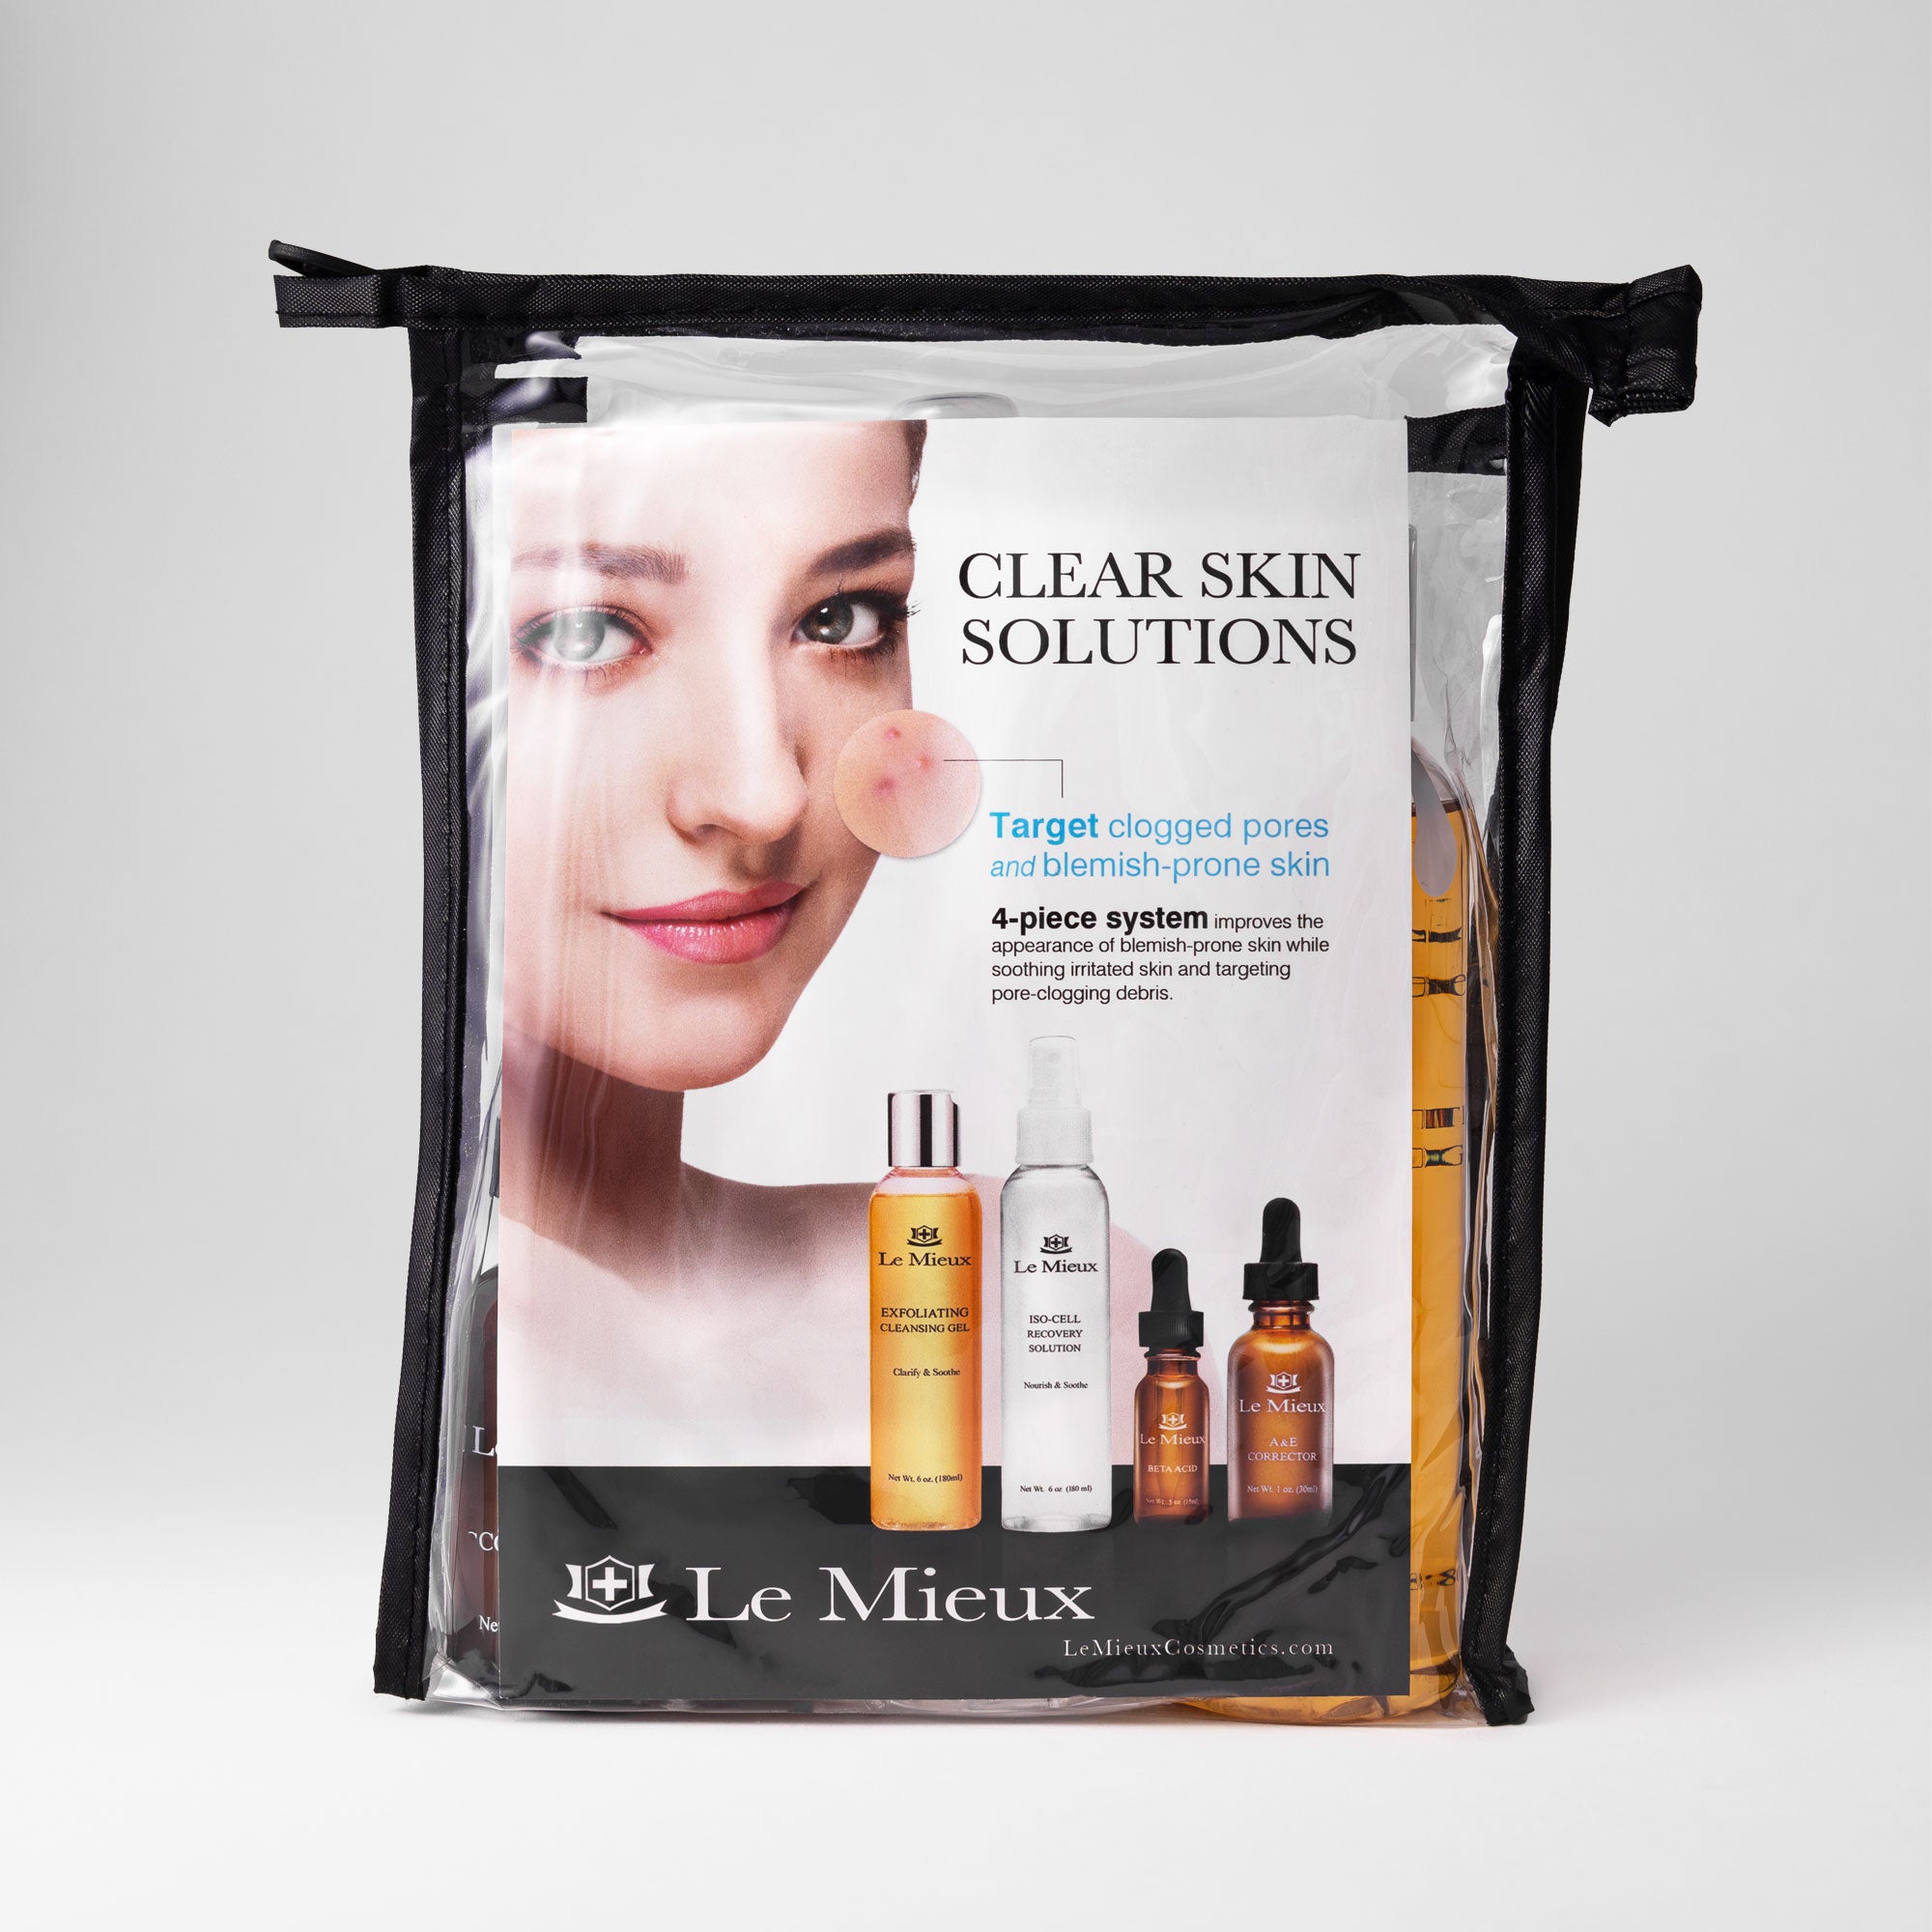  CLEAR SKIN SOLUTIONS from Le Mieux Skincare - 1